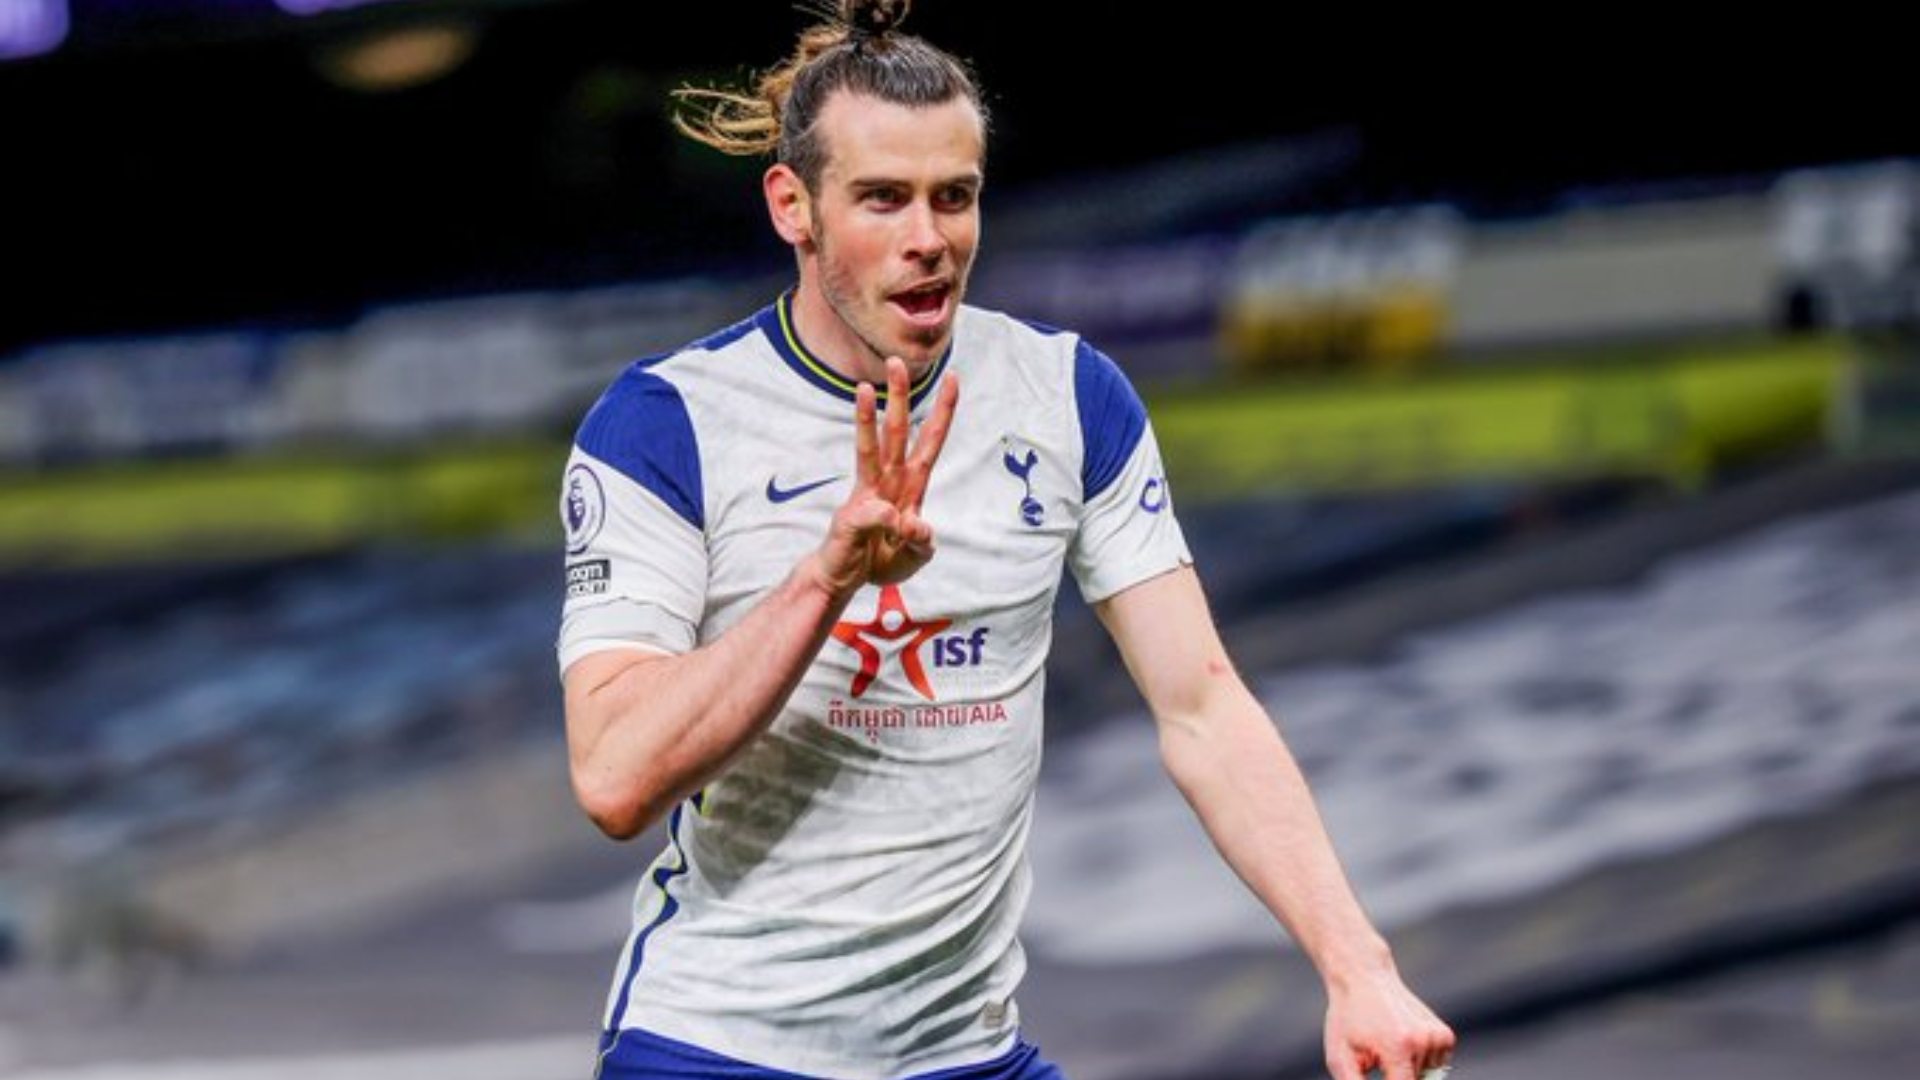 Gareth Bale scored his first hat-trick in the Premier League after eight years.